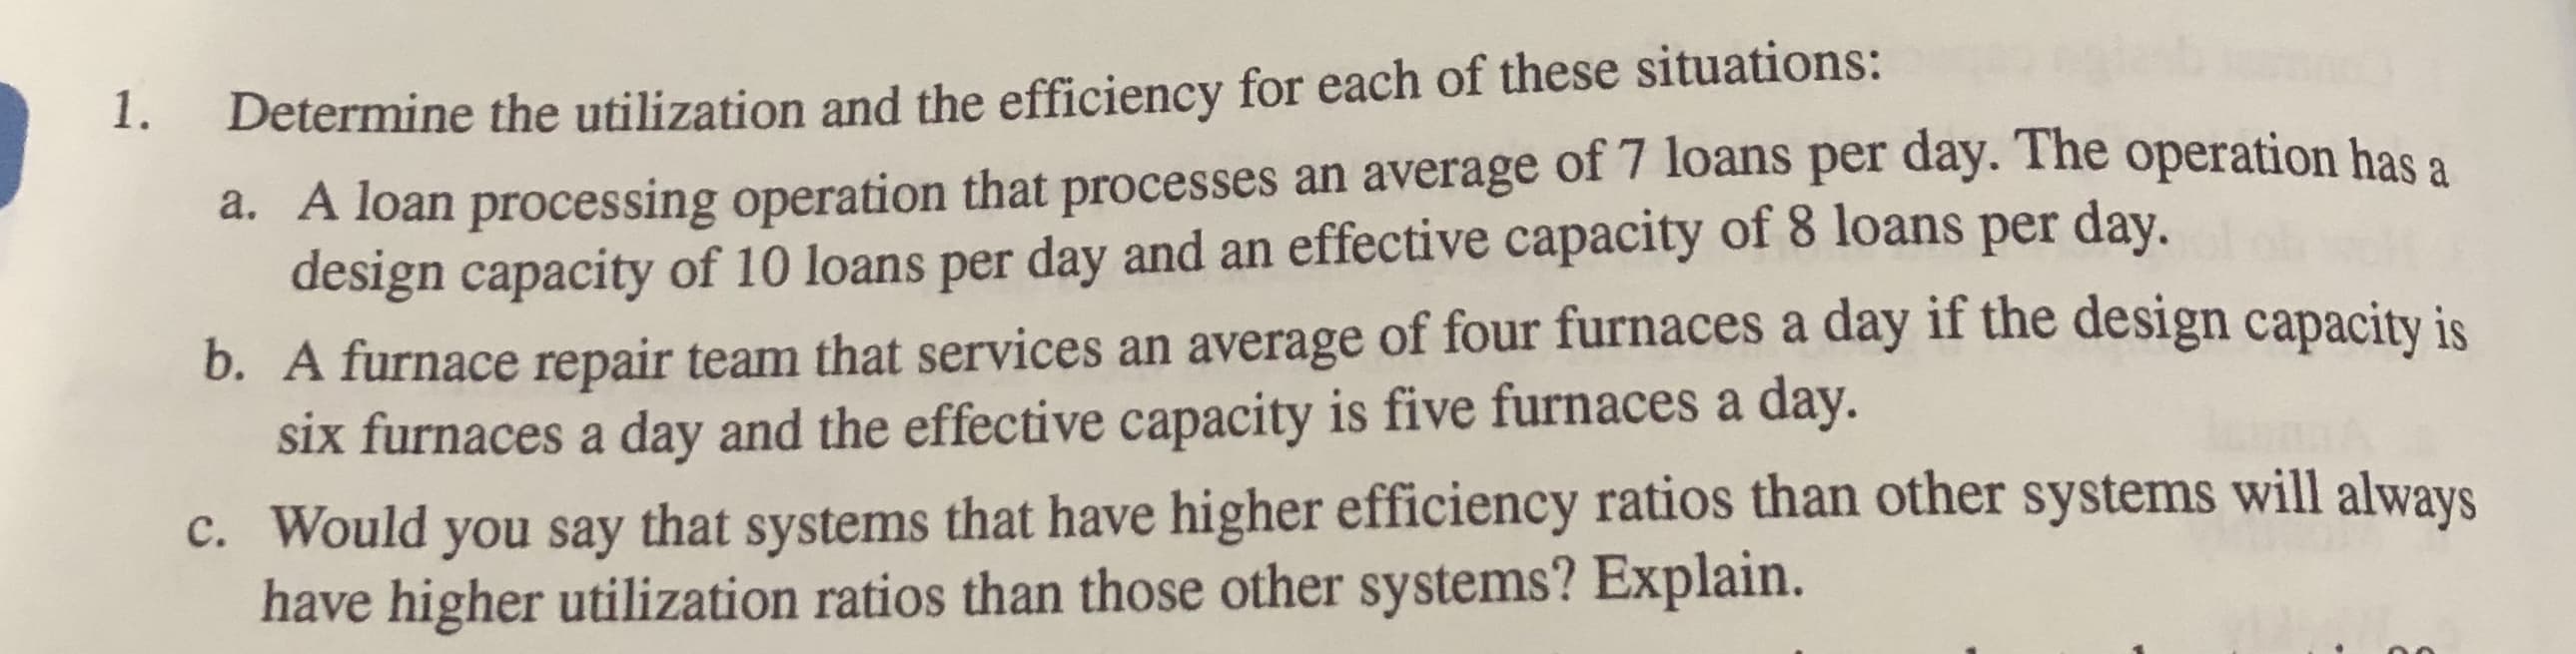 c. Would you say that systems that have higher efficiency ratios than other systems will always
have higher utilization ratios than those other systems? Explain.
